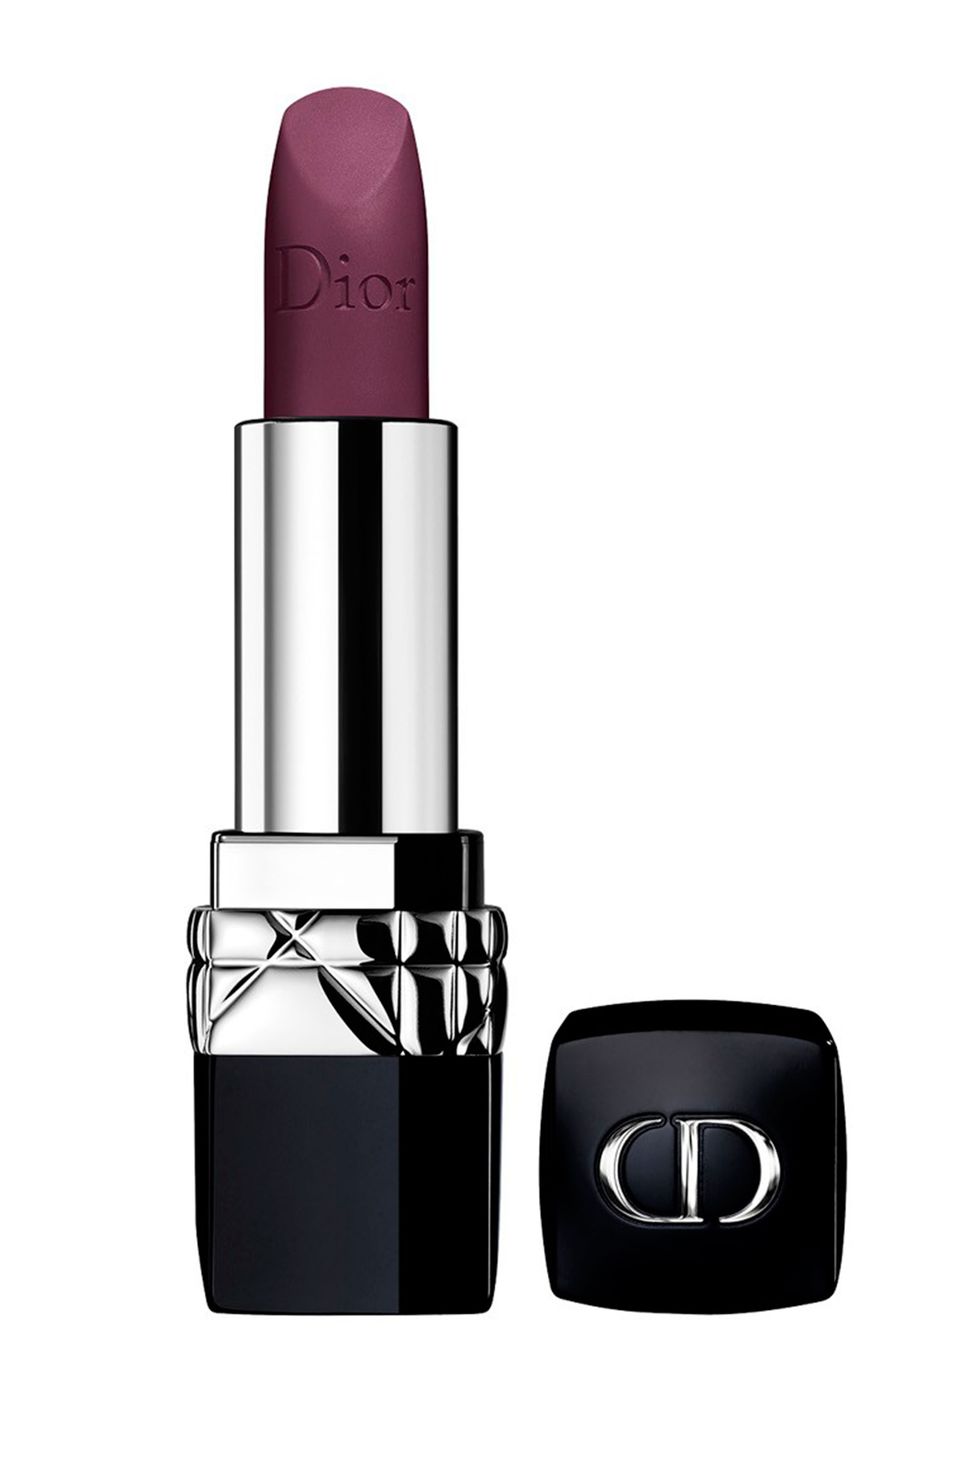 Dior Rouge Poison AW16 berry lipstick trends